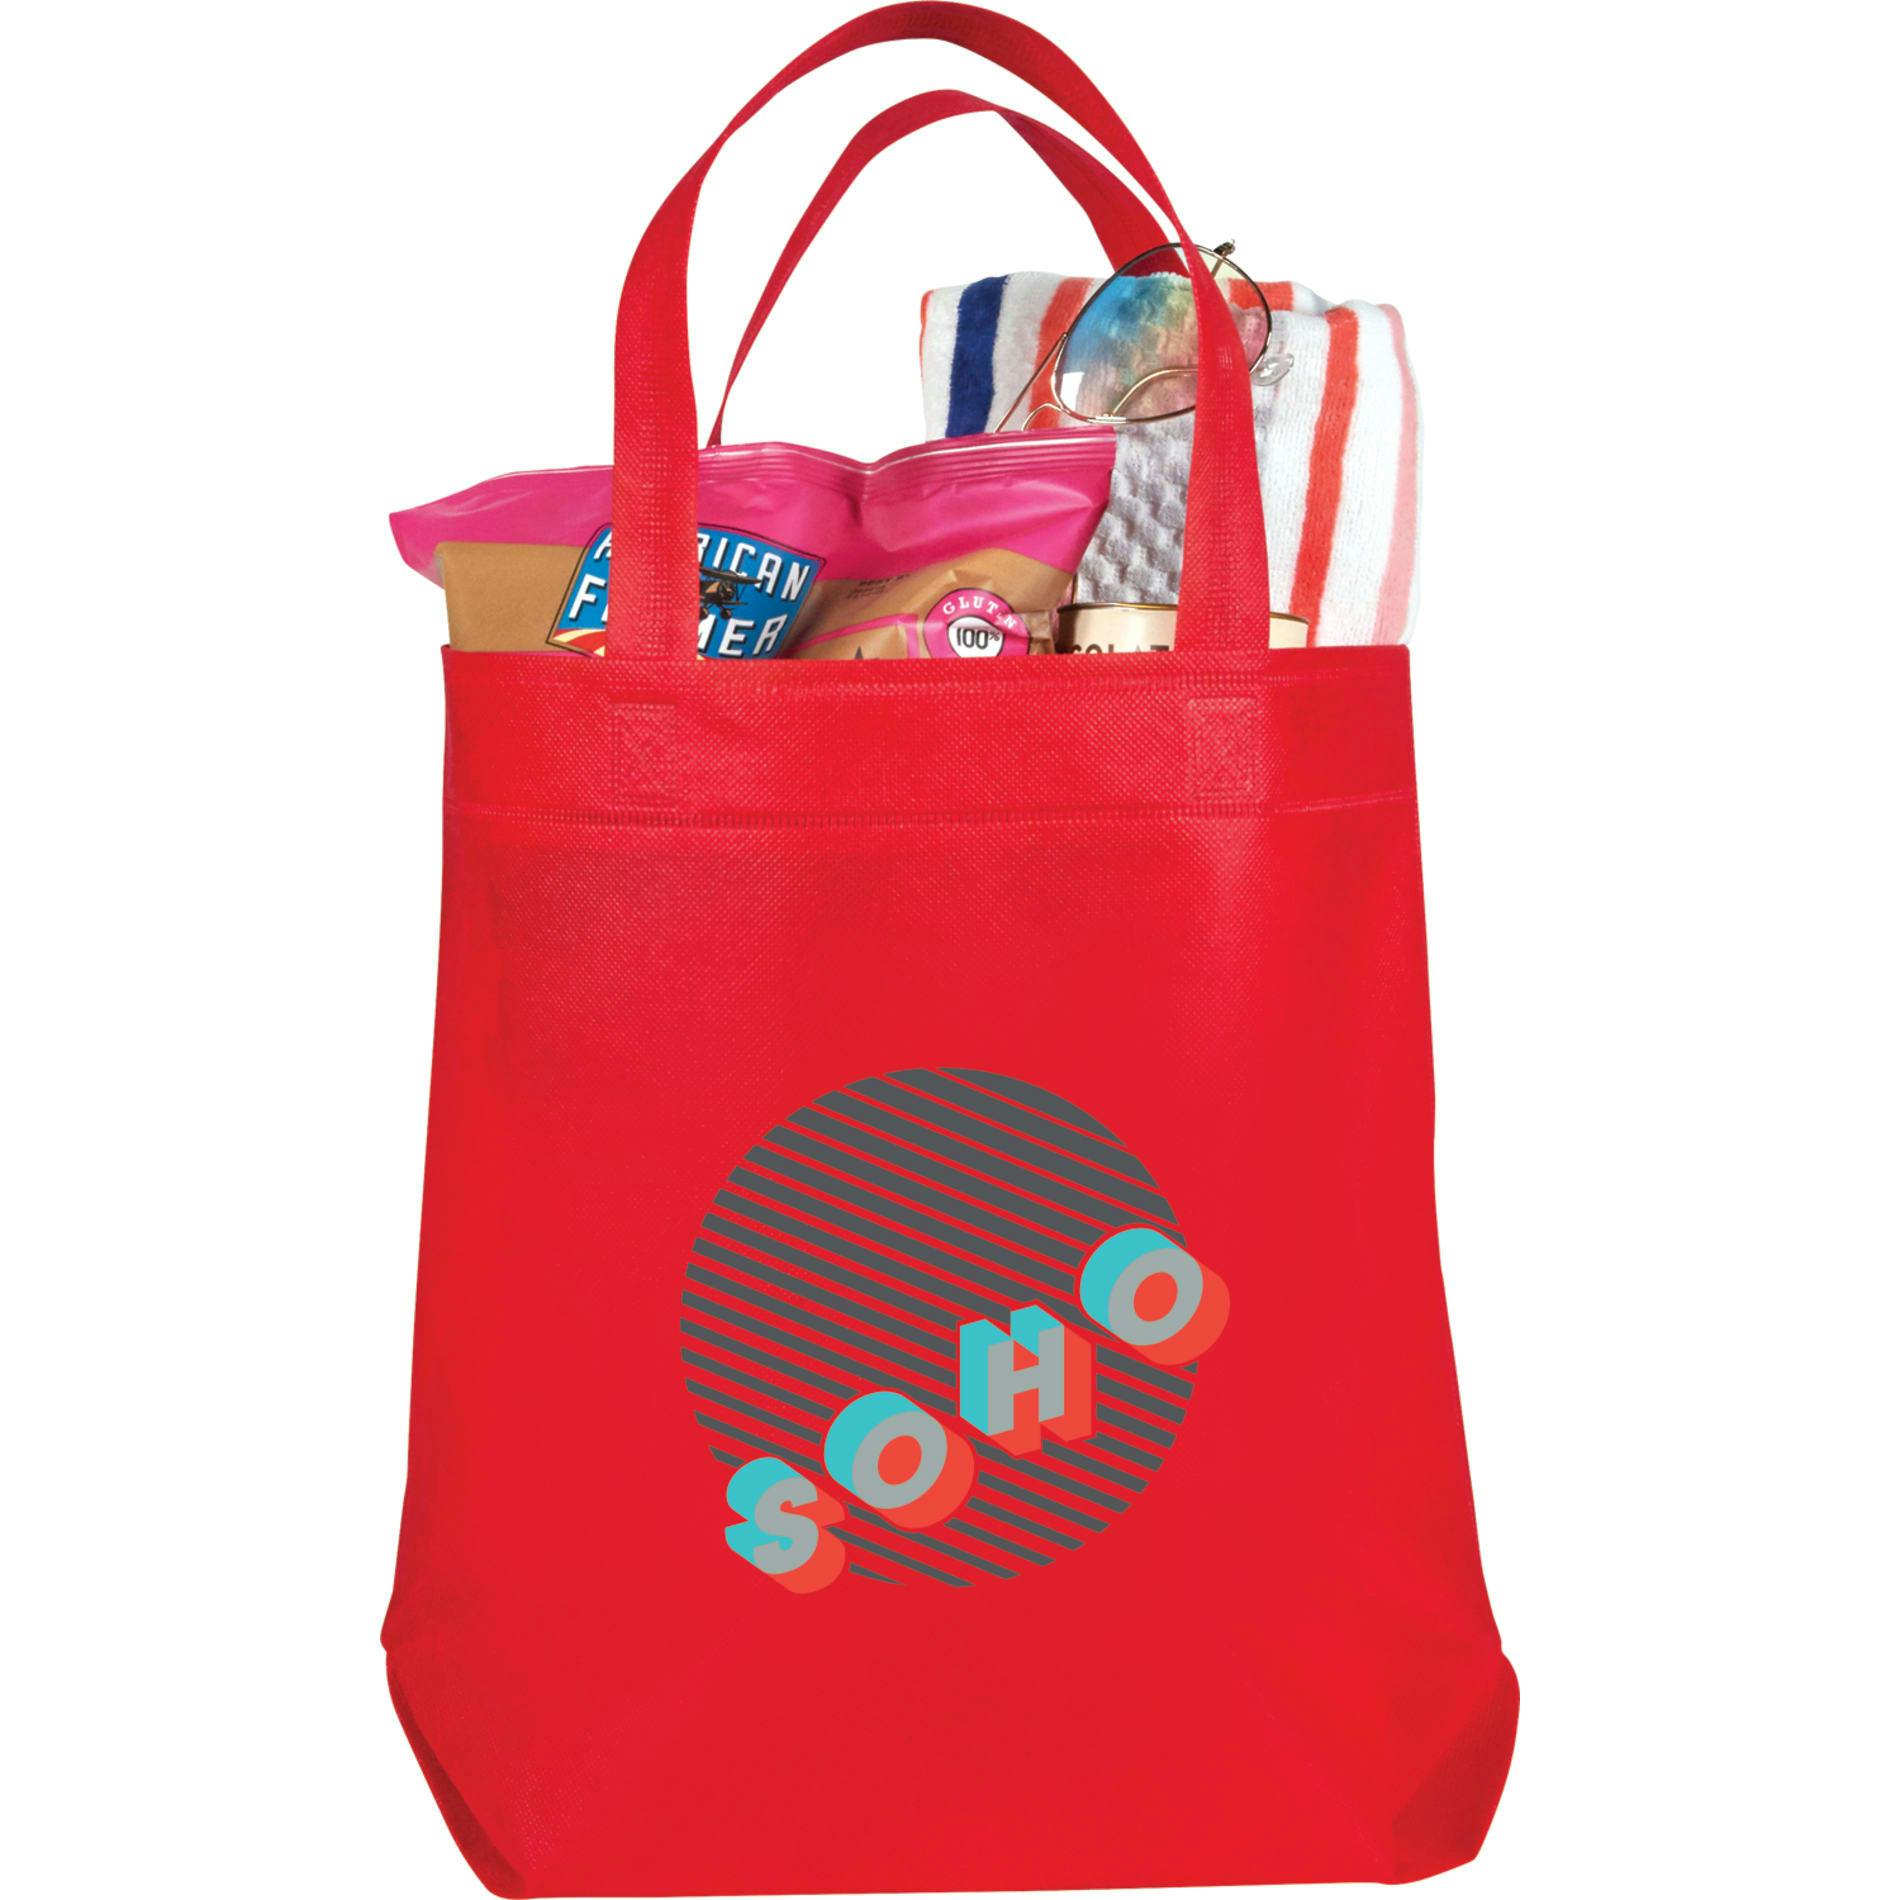 Challenger Non-Woven Shopper Tote - additional Image 4